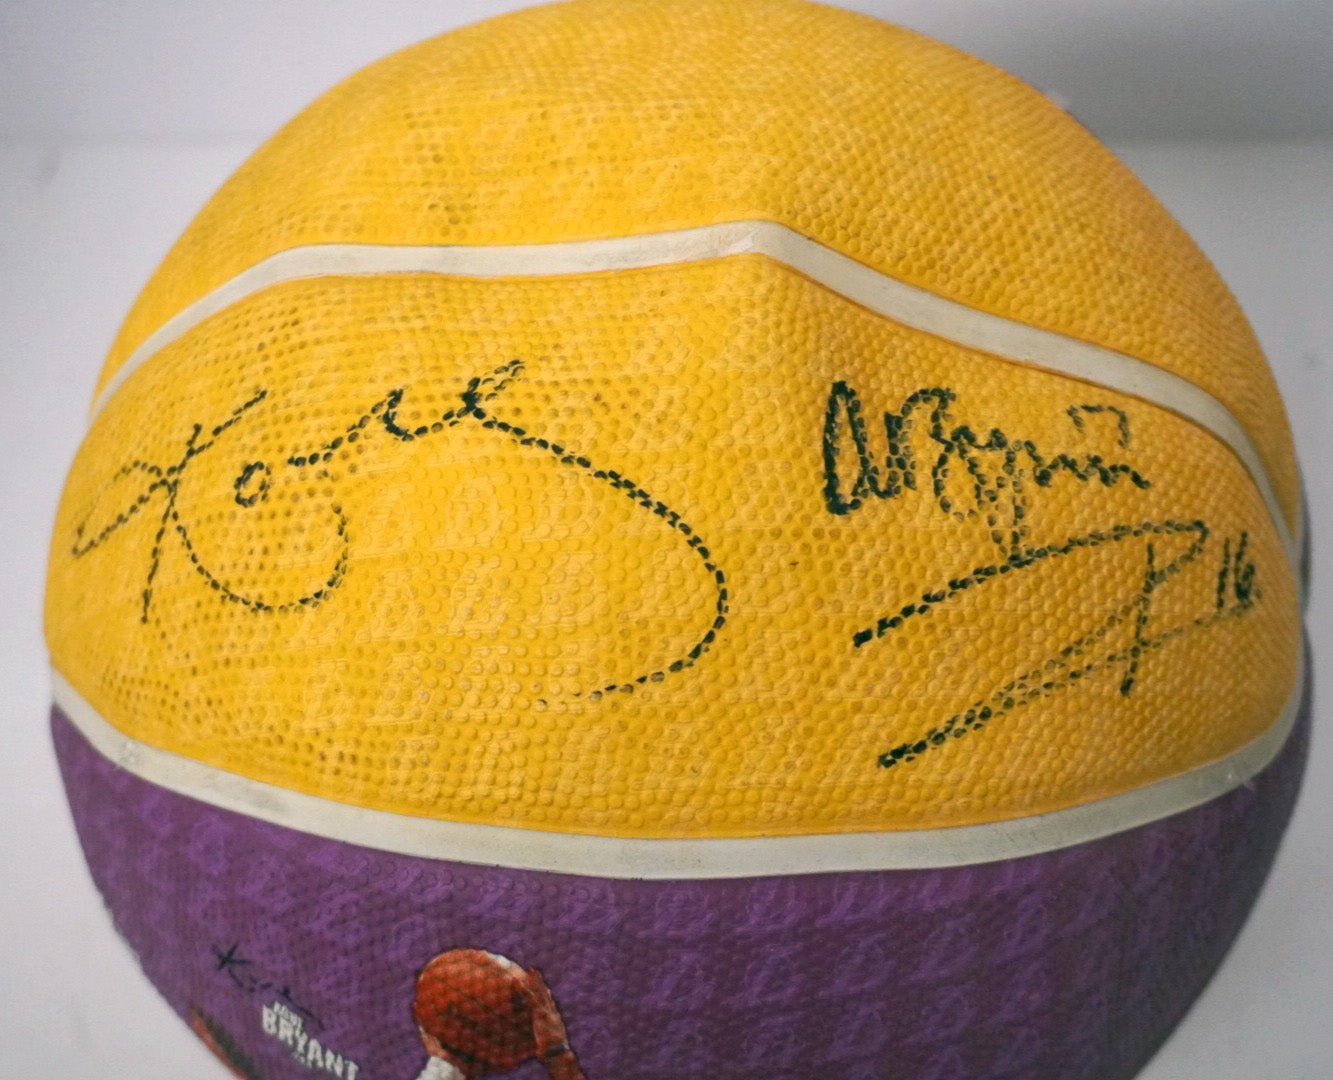 Los Angeles Lakers Kobe Bryant, Andrew Bynum, Pau Gasol basketball with proof